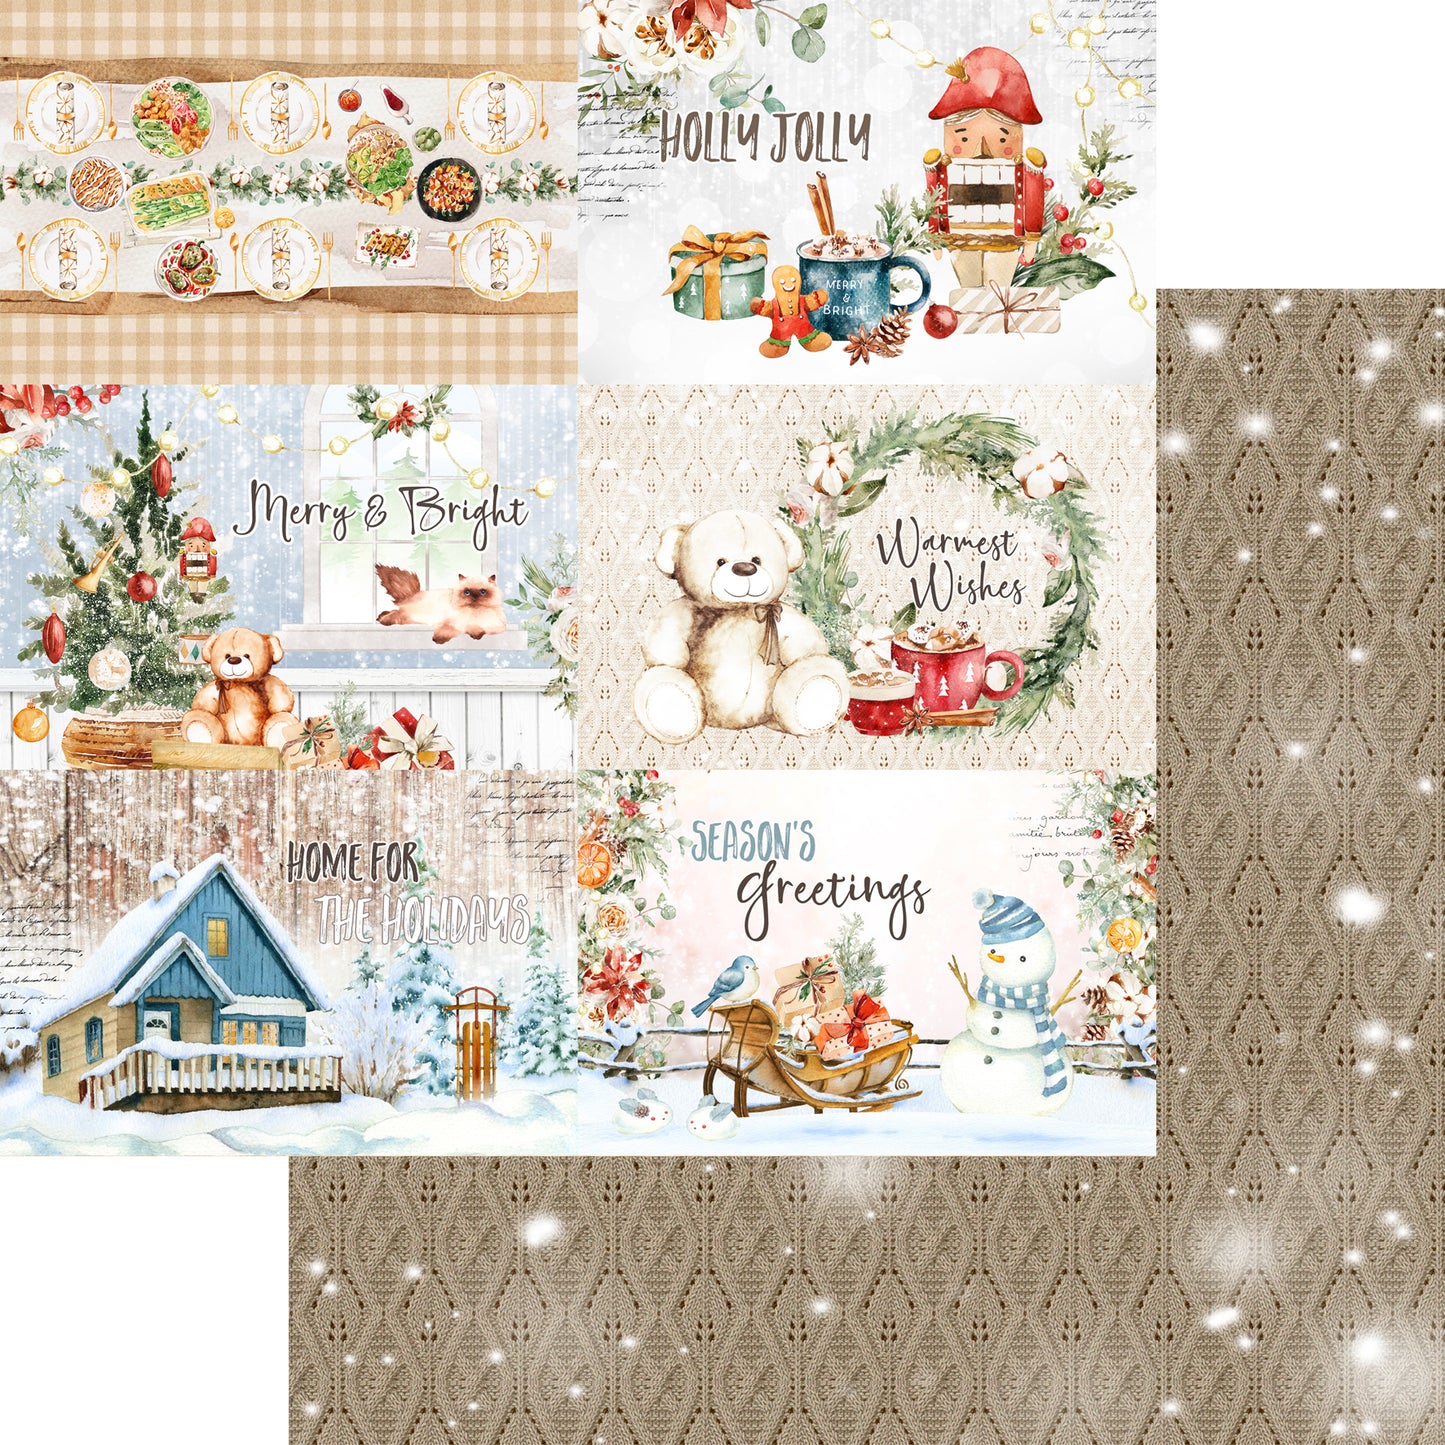 6x6 Paper Collection Pack - Home for the Holidays - Memory Place - Asuka Studio